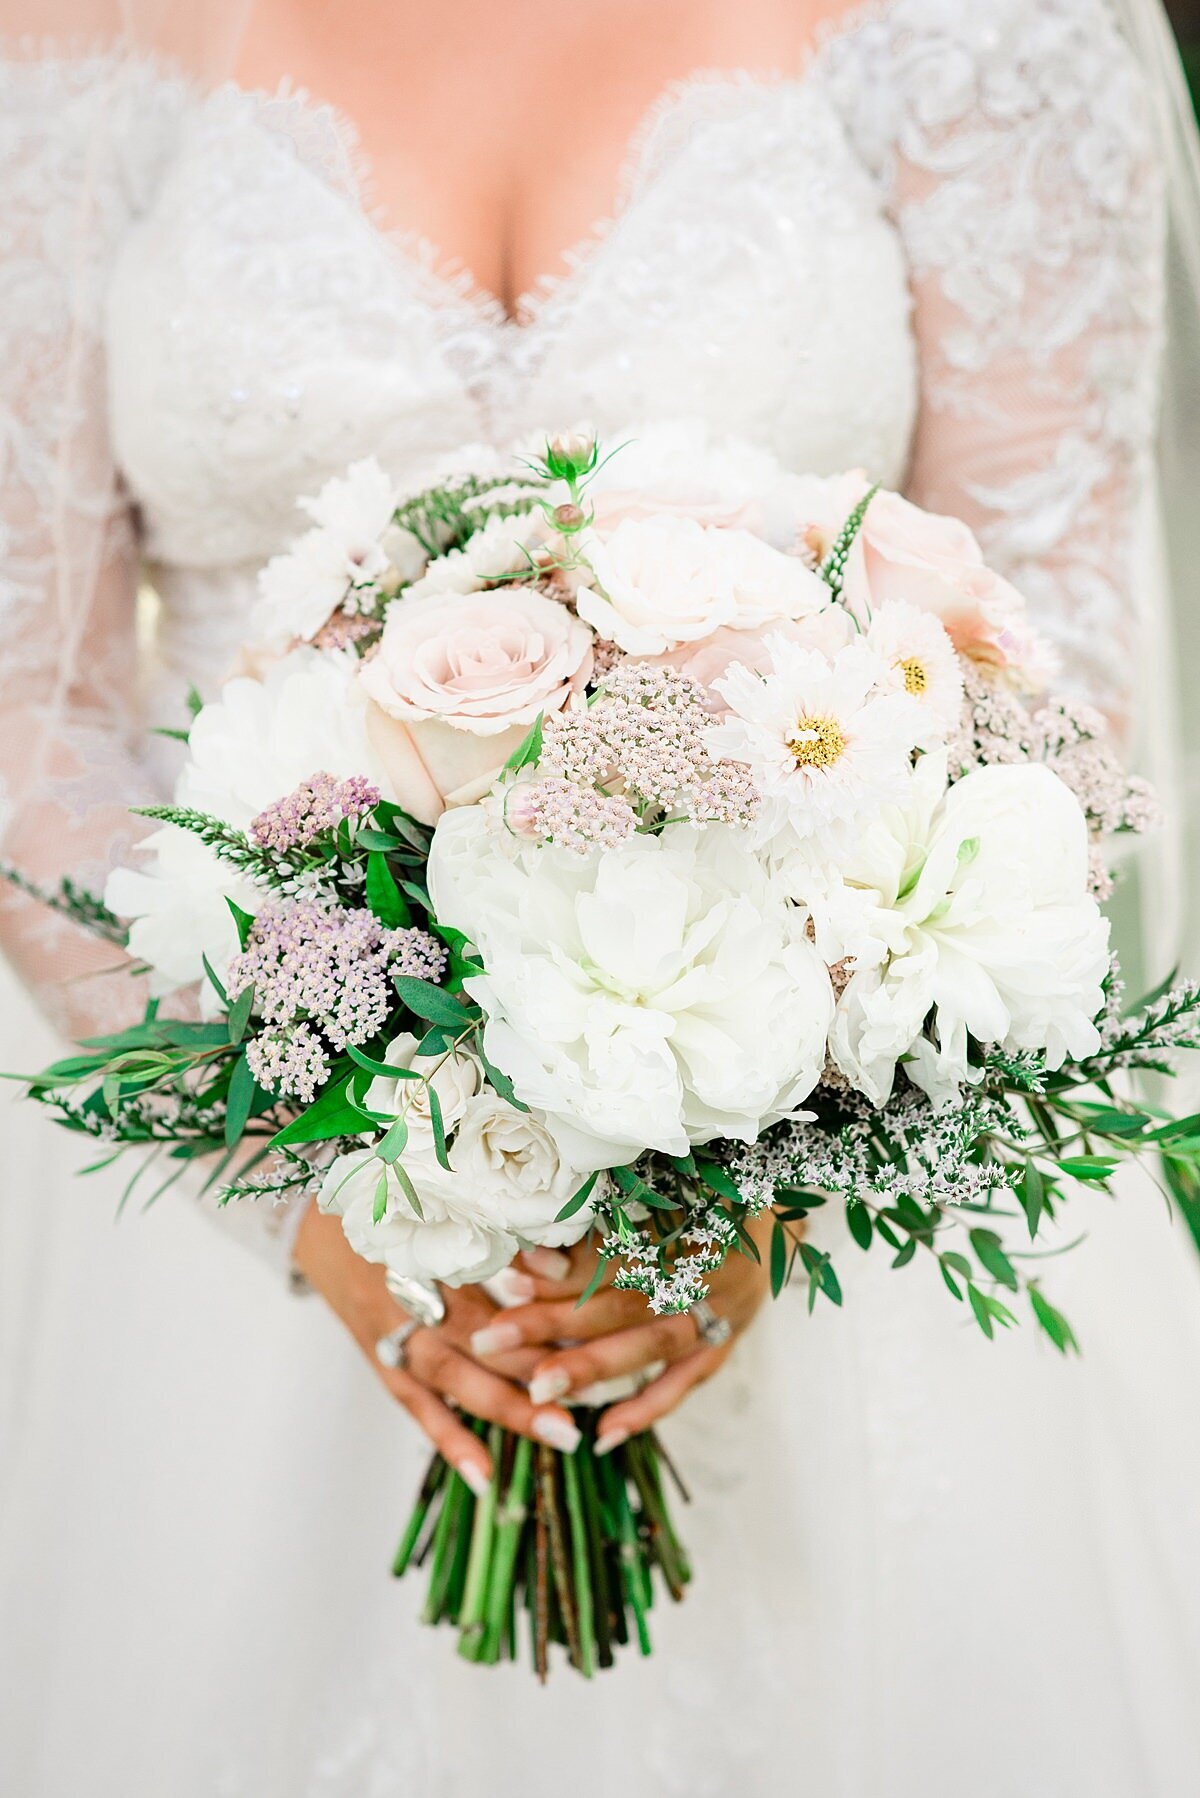 Detail of the bridal bouquet. The bride is wearing a long sleeved lace wedding dress with a deep v neckline. The bridal bouquet is all white with hints of greenery, light pink rice flower, white peonies, white roses,  blush roses, and other white flowers.